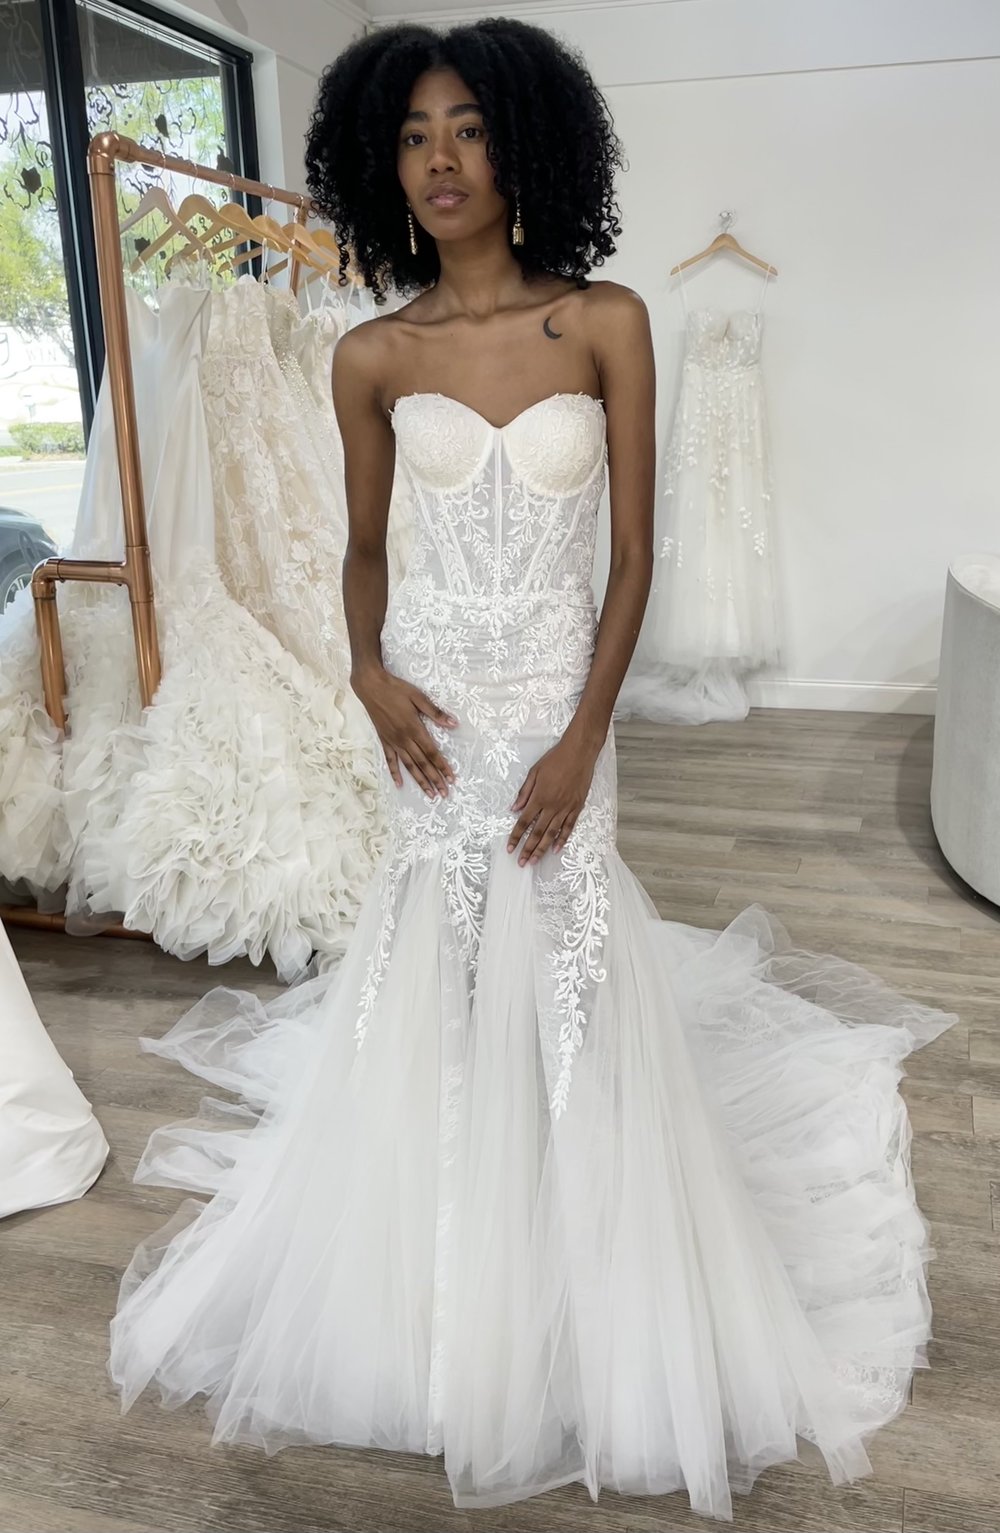 Joy Ines Di Santo Wedding Dress Available for Off The Rack